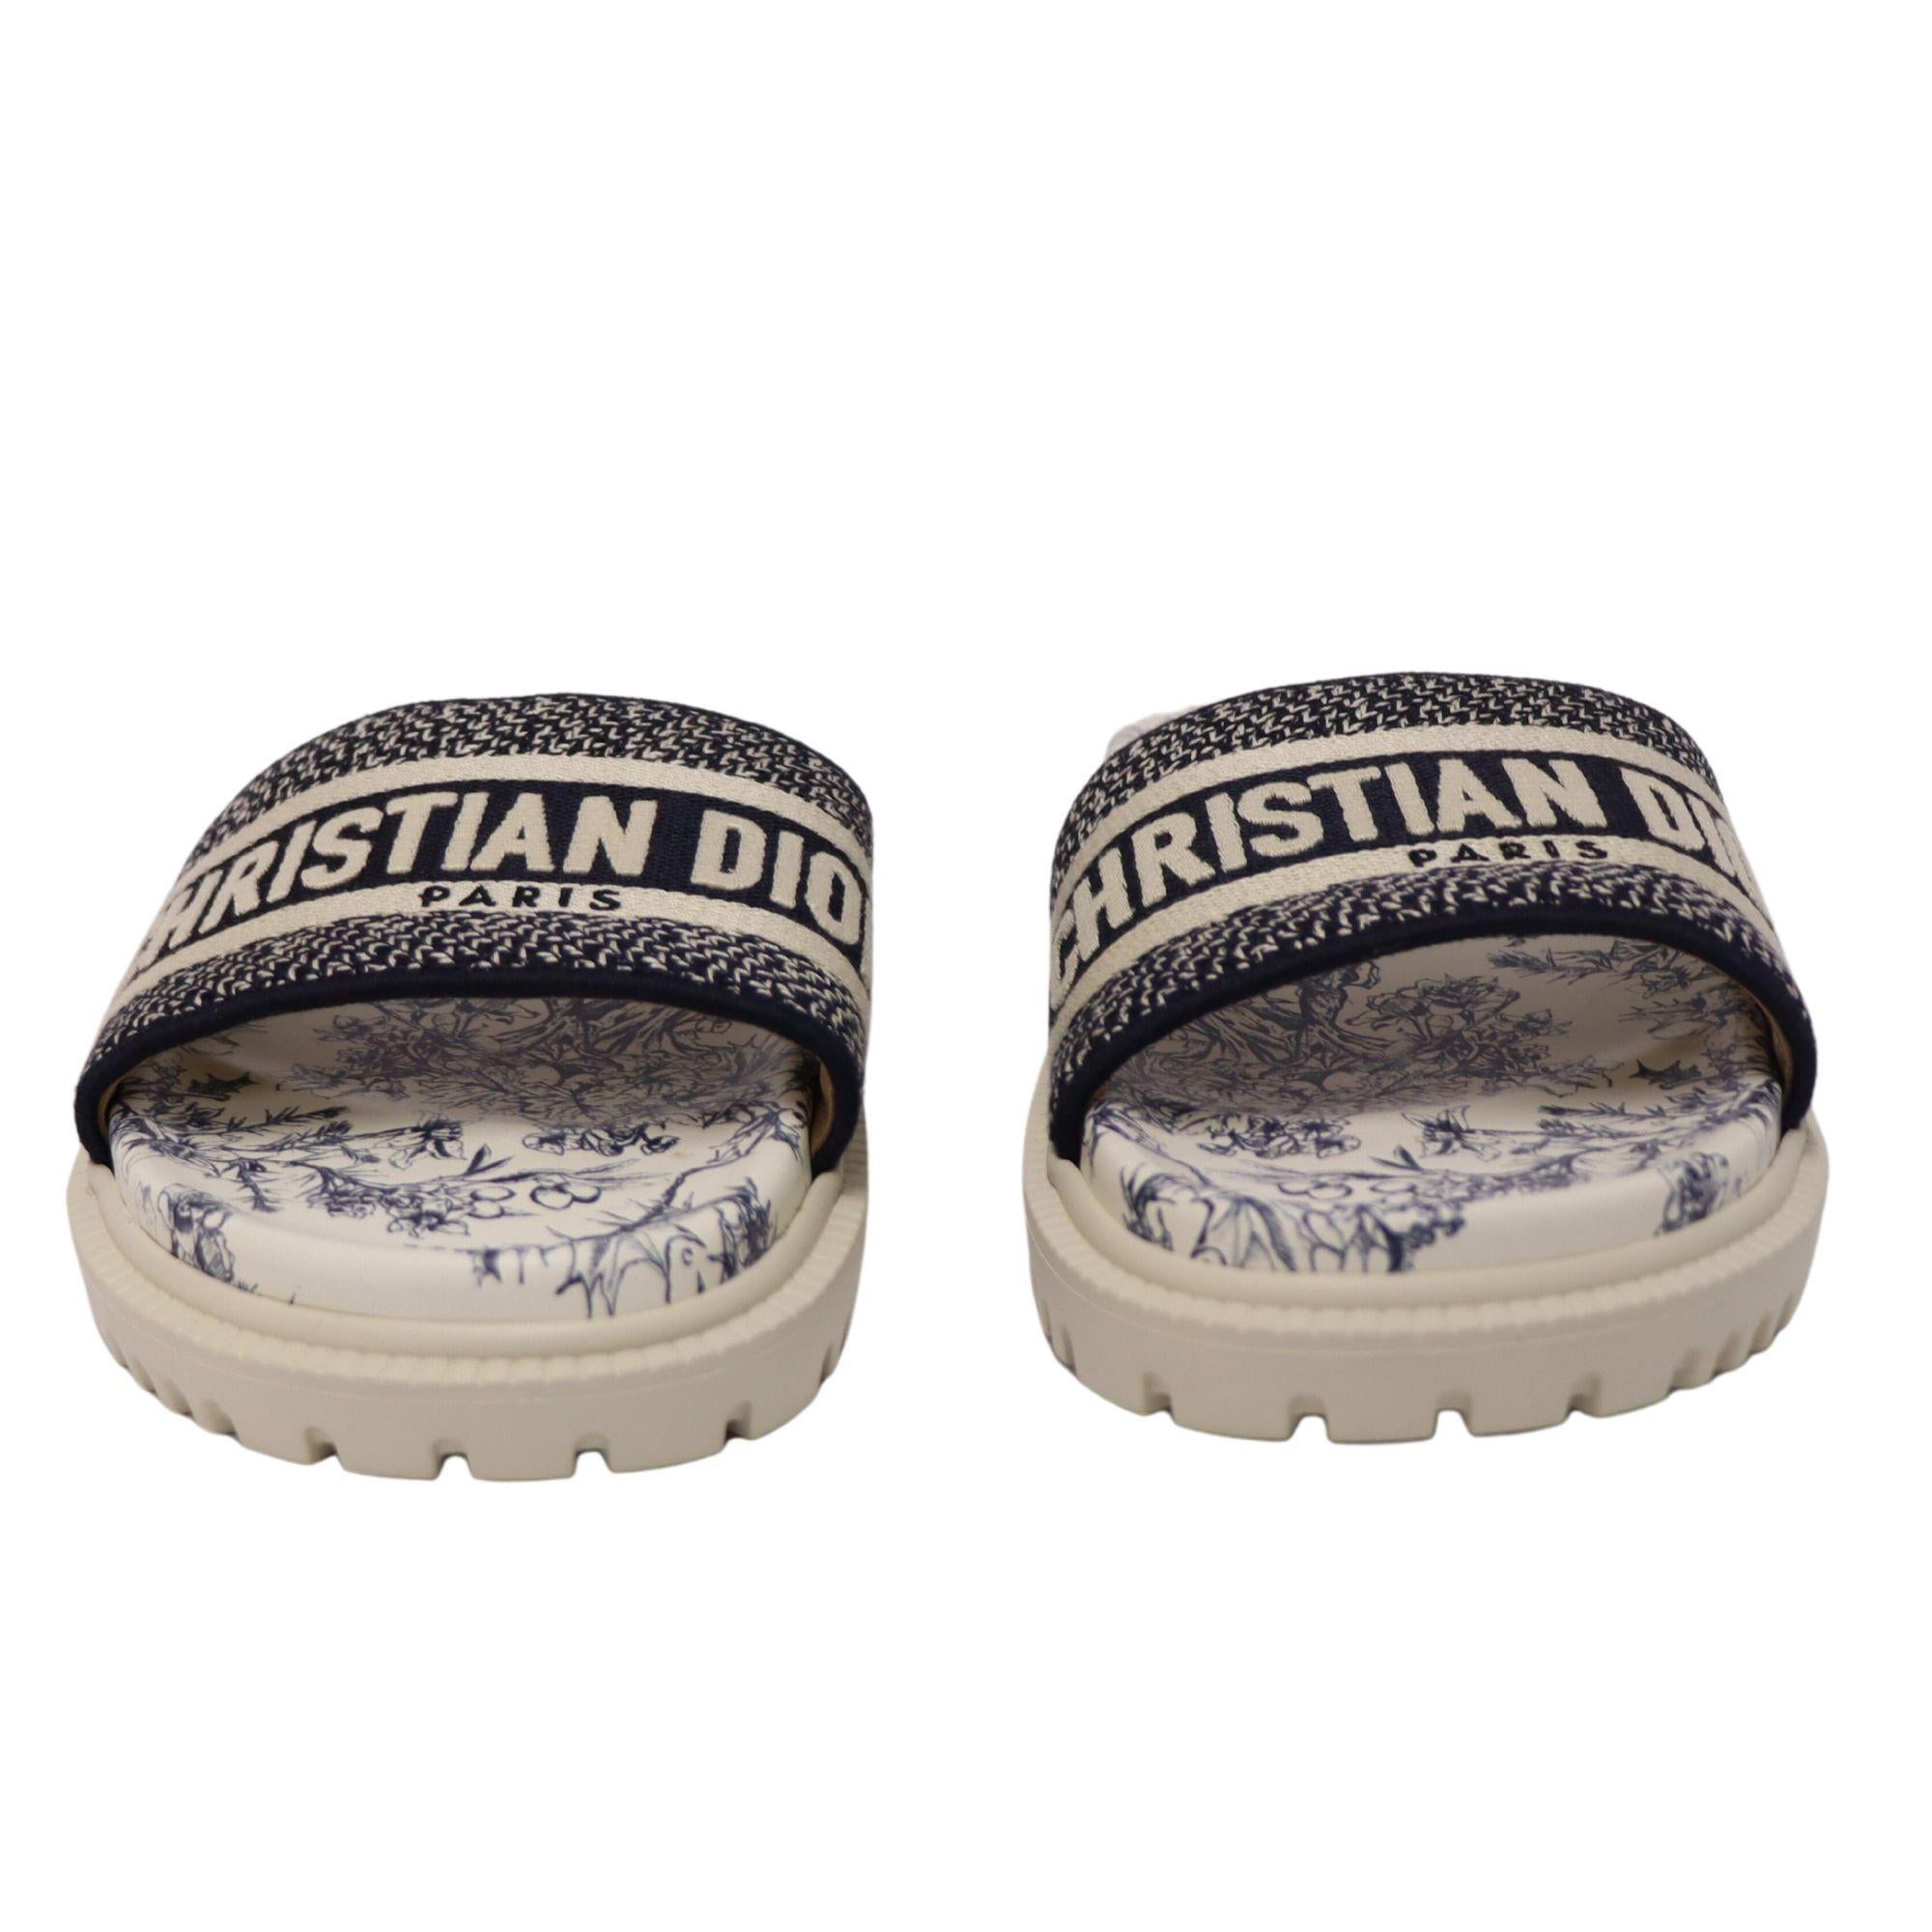 The perfect summer slipper. This New Christian Dior Slipper features navy blue and white Toile de Jouy print and logo embroidered cotton band across the front. Chunky rubber sole measures approximately 20mm/ 1 inch. 

Size: EU 38